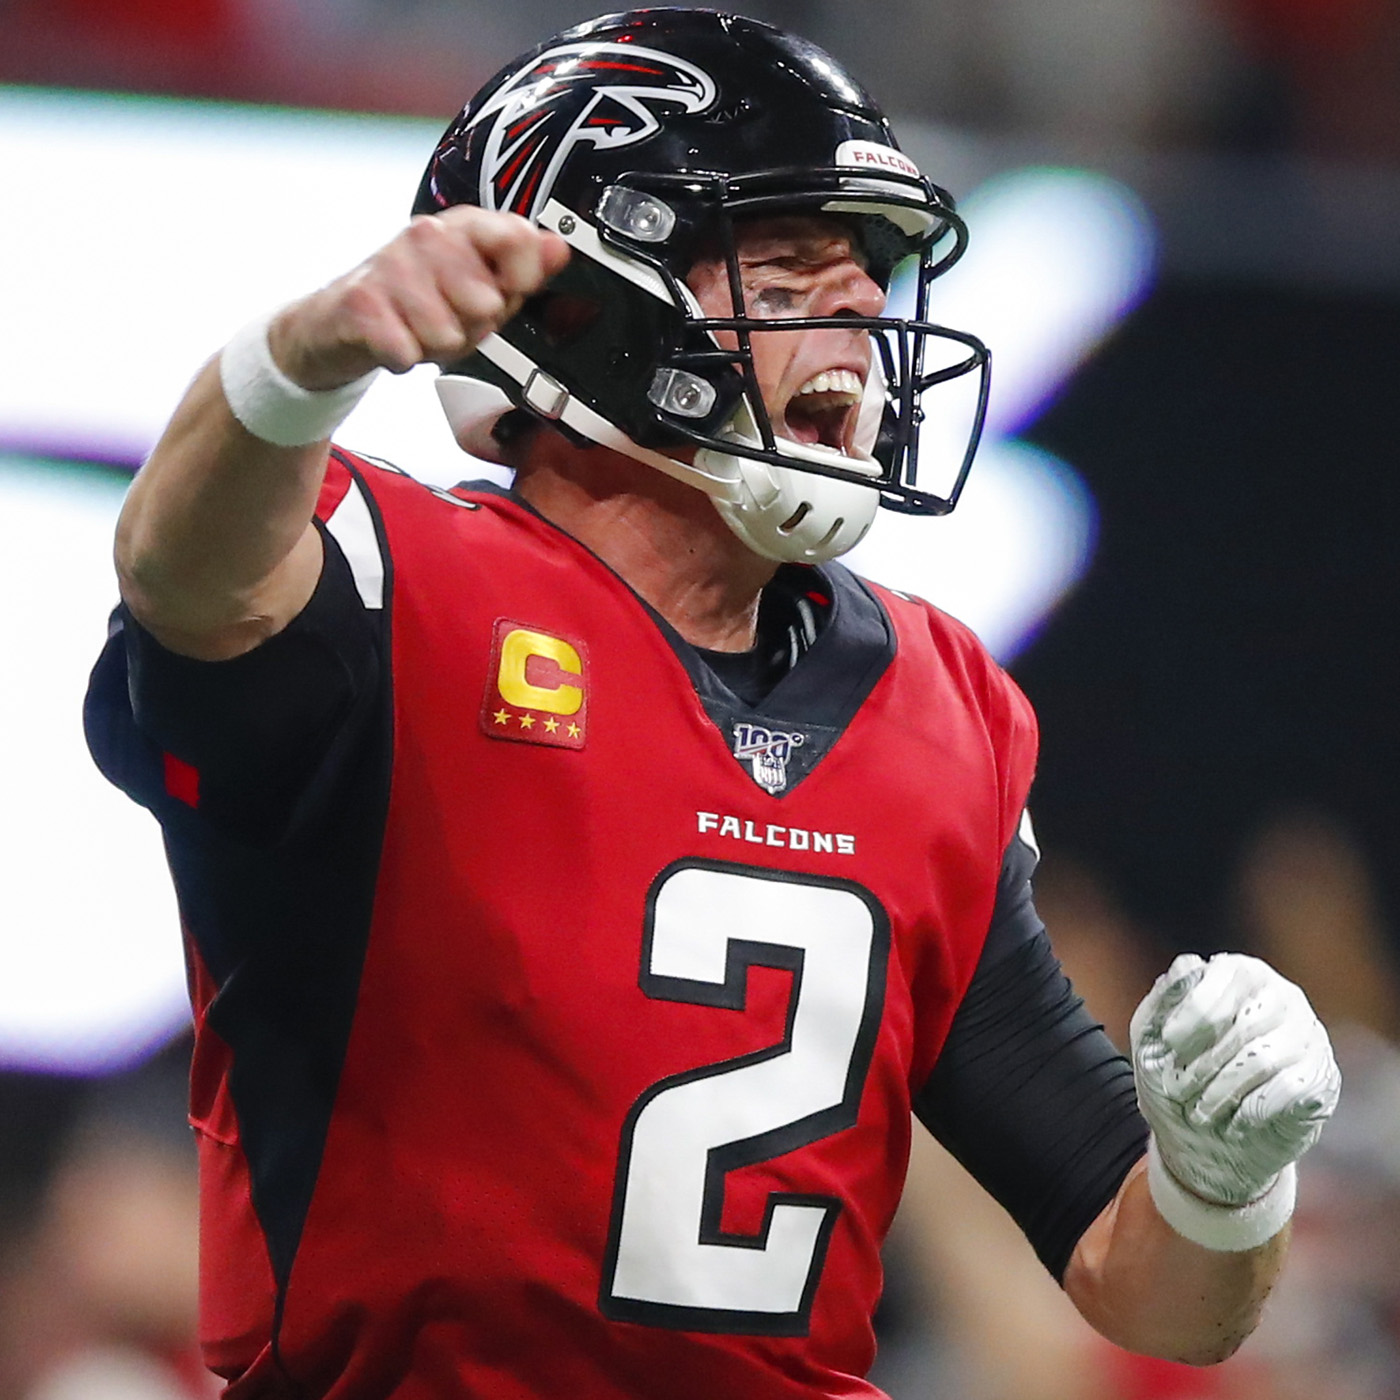 HIghlights: Falcons race past Eagles on Jones' late TD